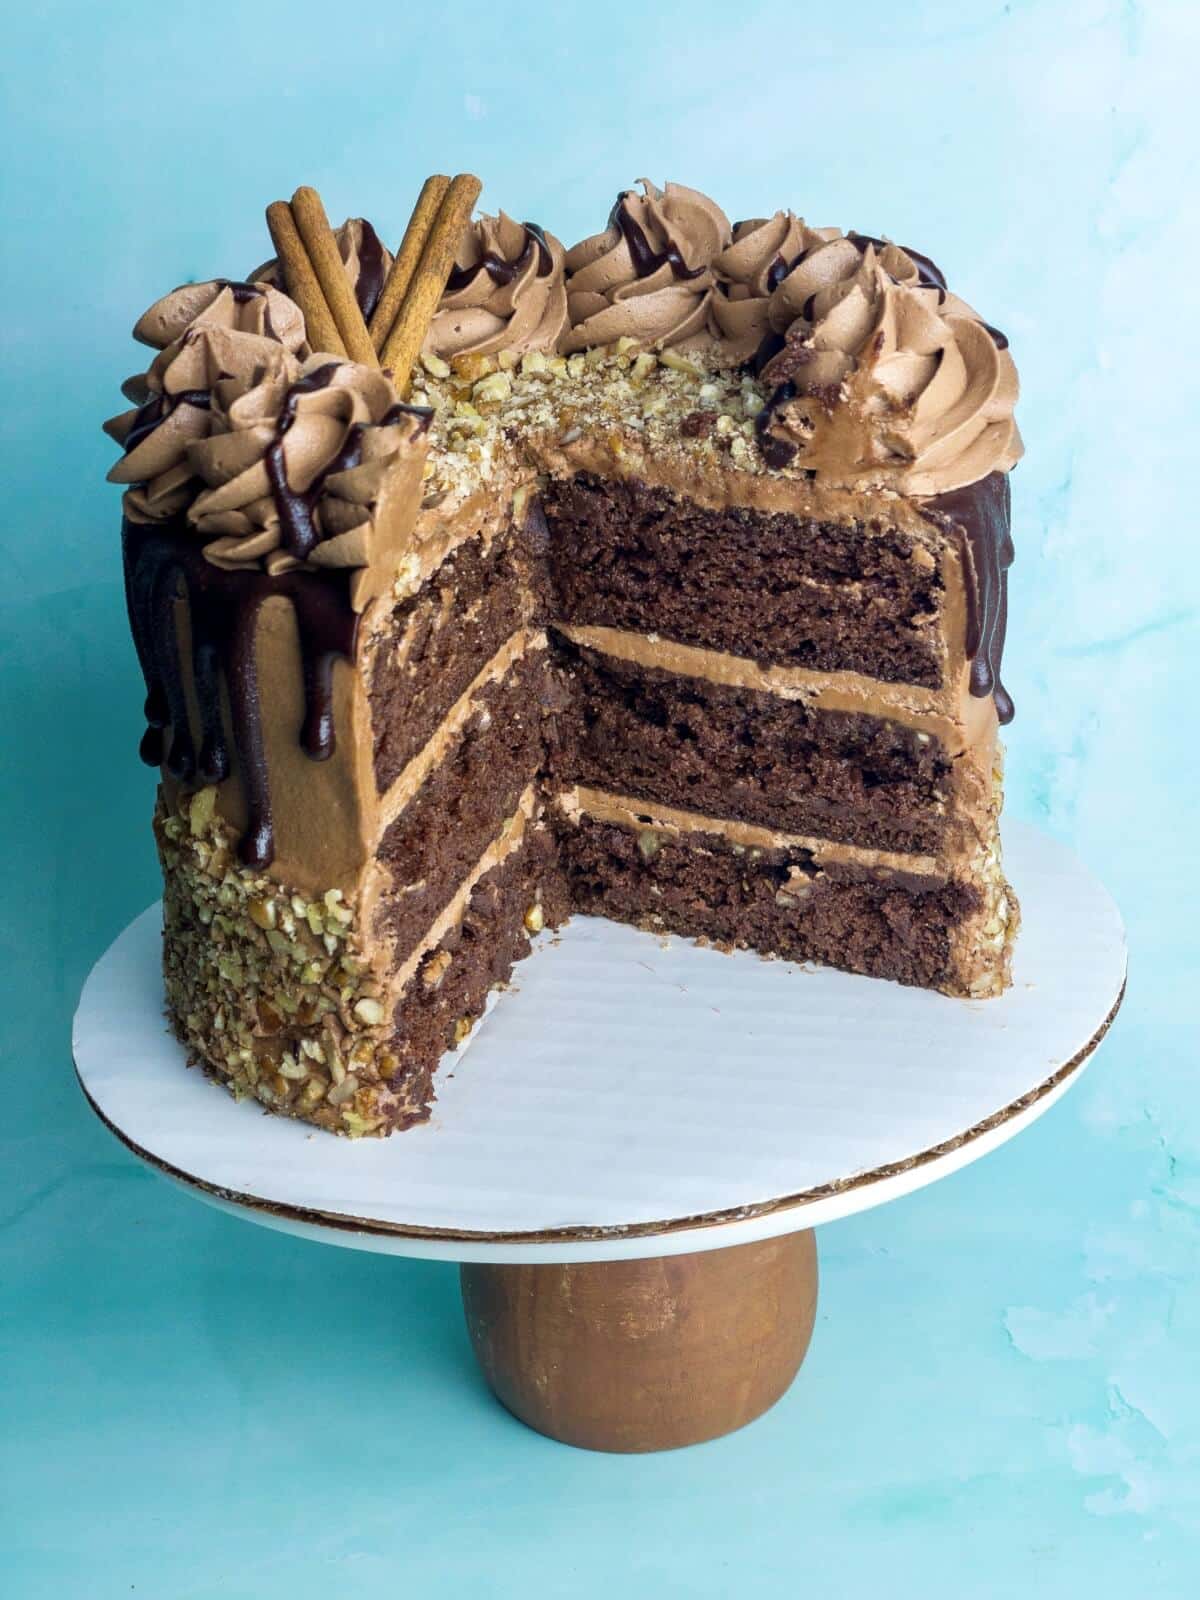 a chocolate cinnamon layer cake on a cake stand with several slices missing